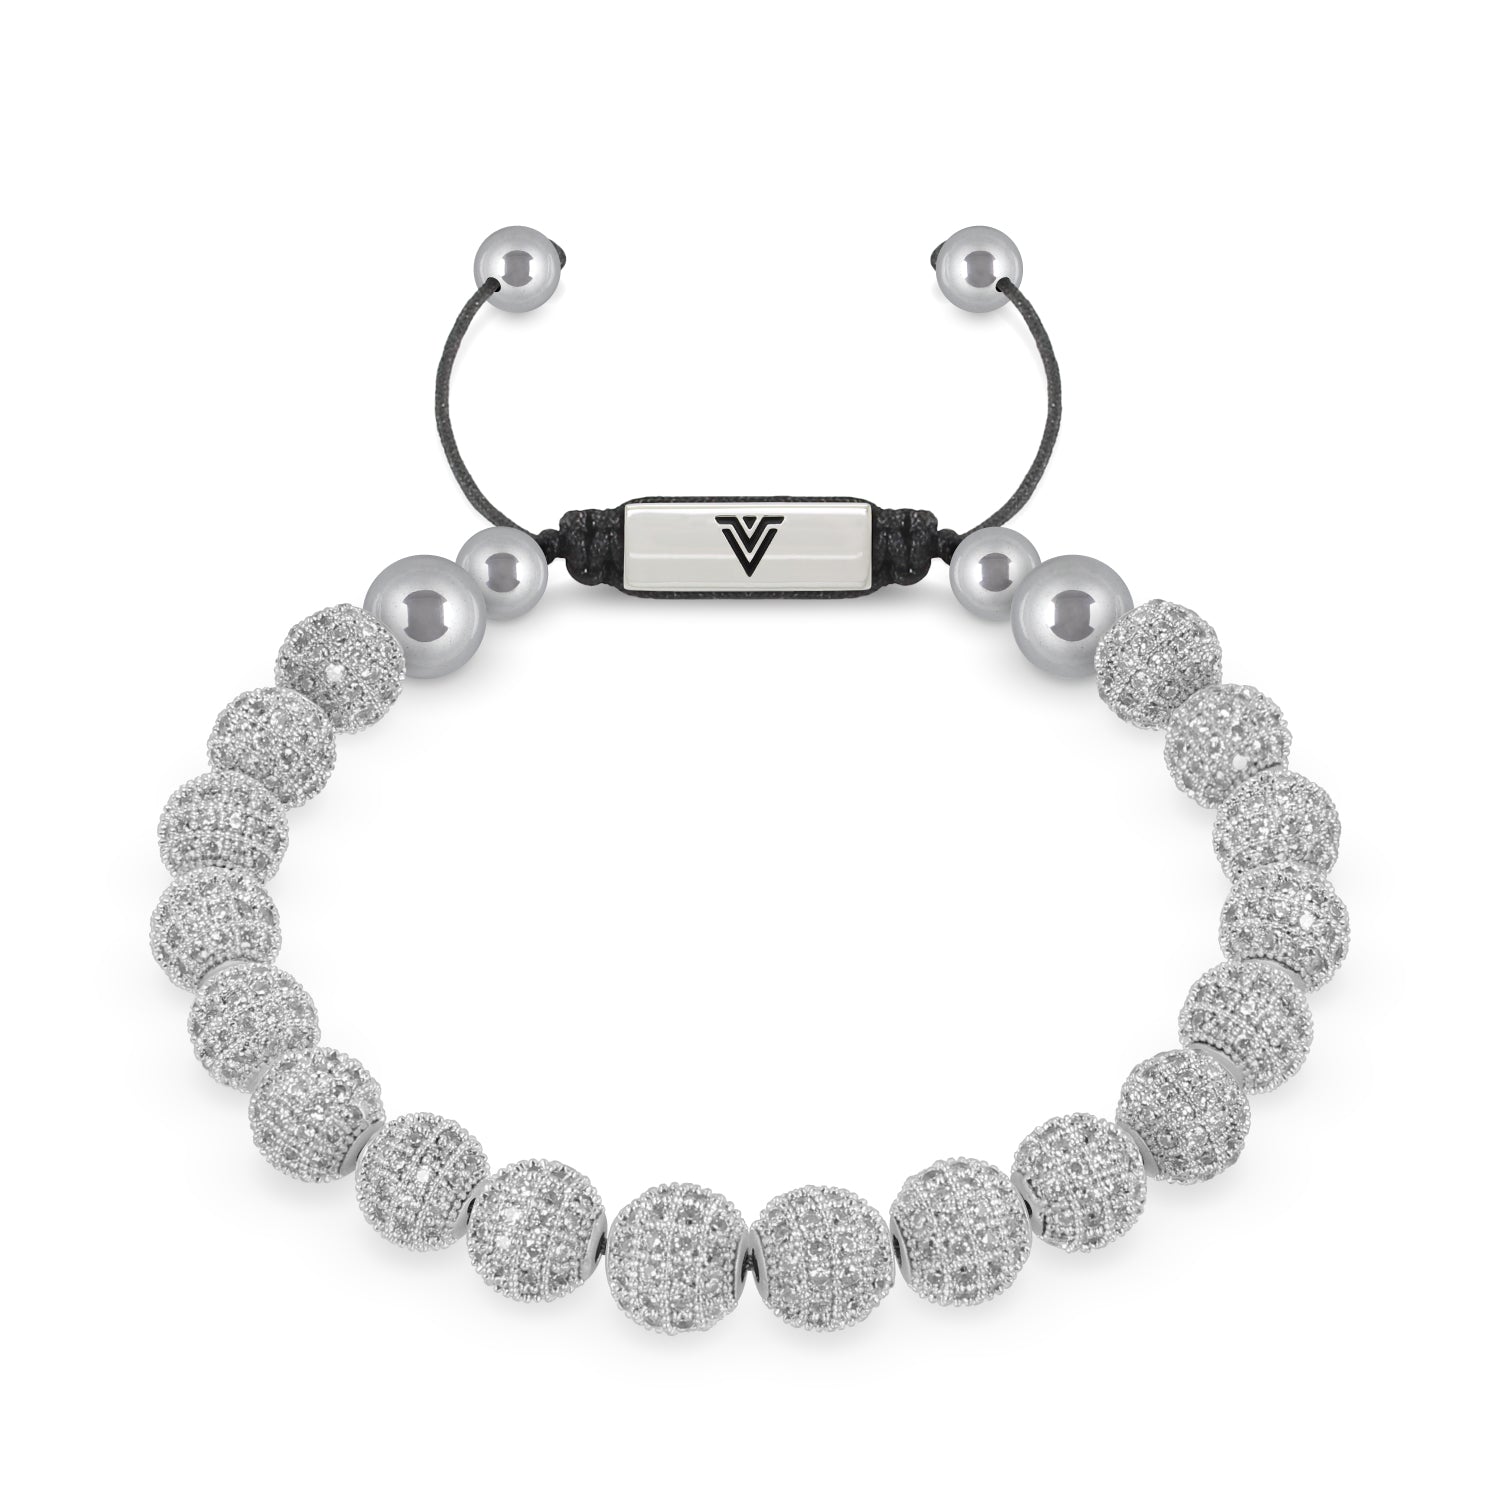 Front view of an 8mm Silver Pave beaded shamballa bracelet with silver stainless steel logo bead made by Voltlin